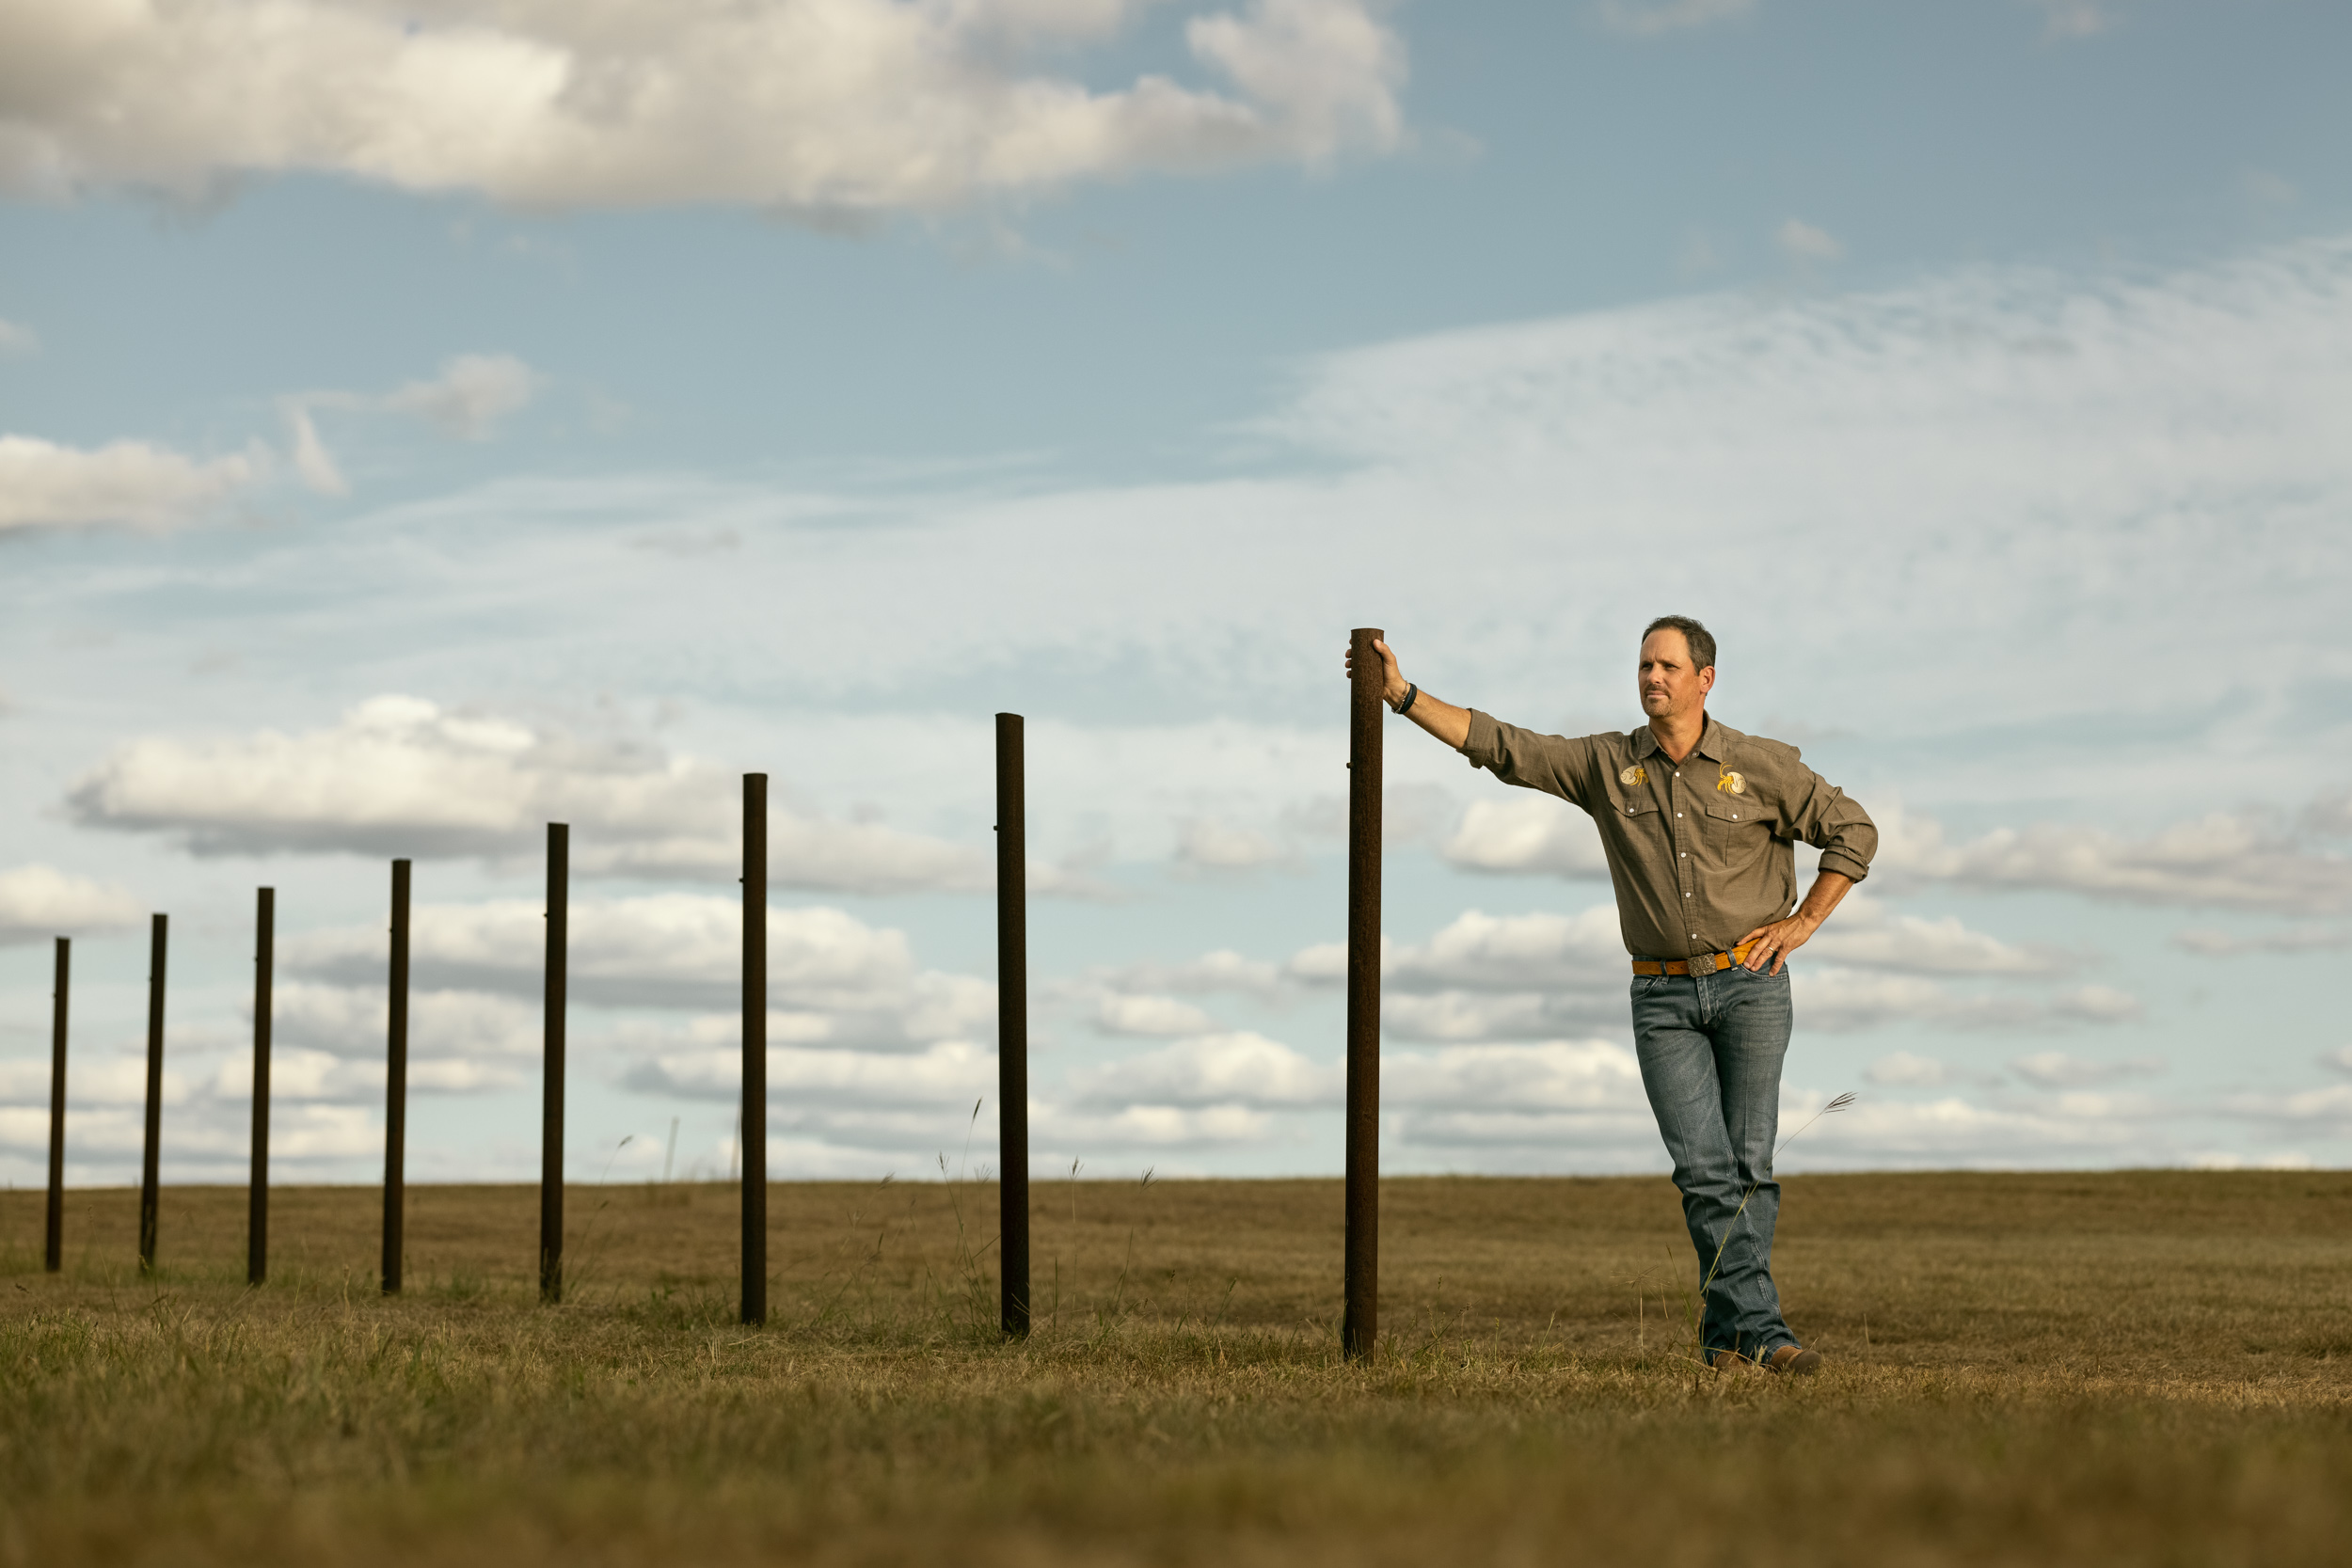 fredericksburg realtor justin cop poses on old fence post in field